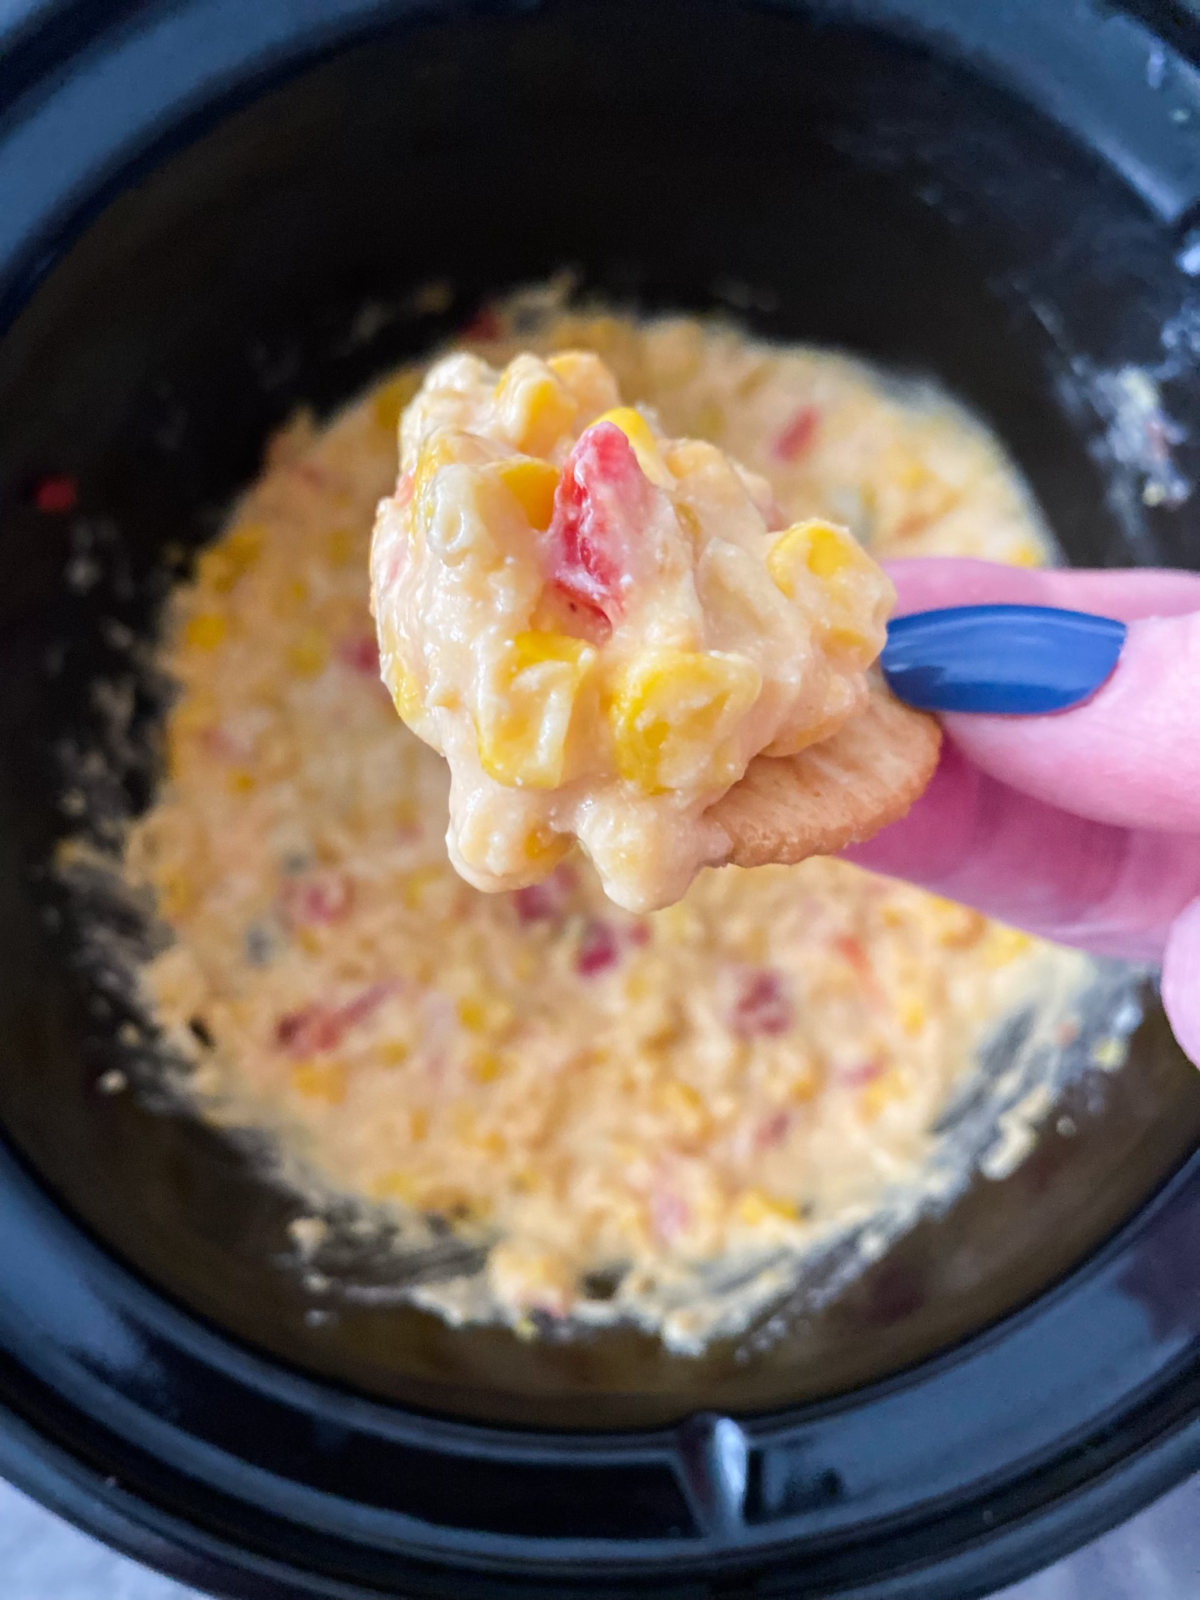 A woman's hand holding a cracker over a Crockpot with a scoop of Corn Dip.